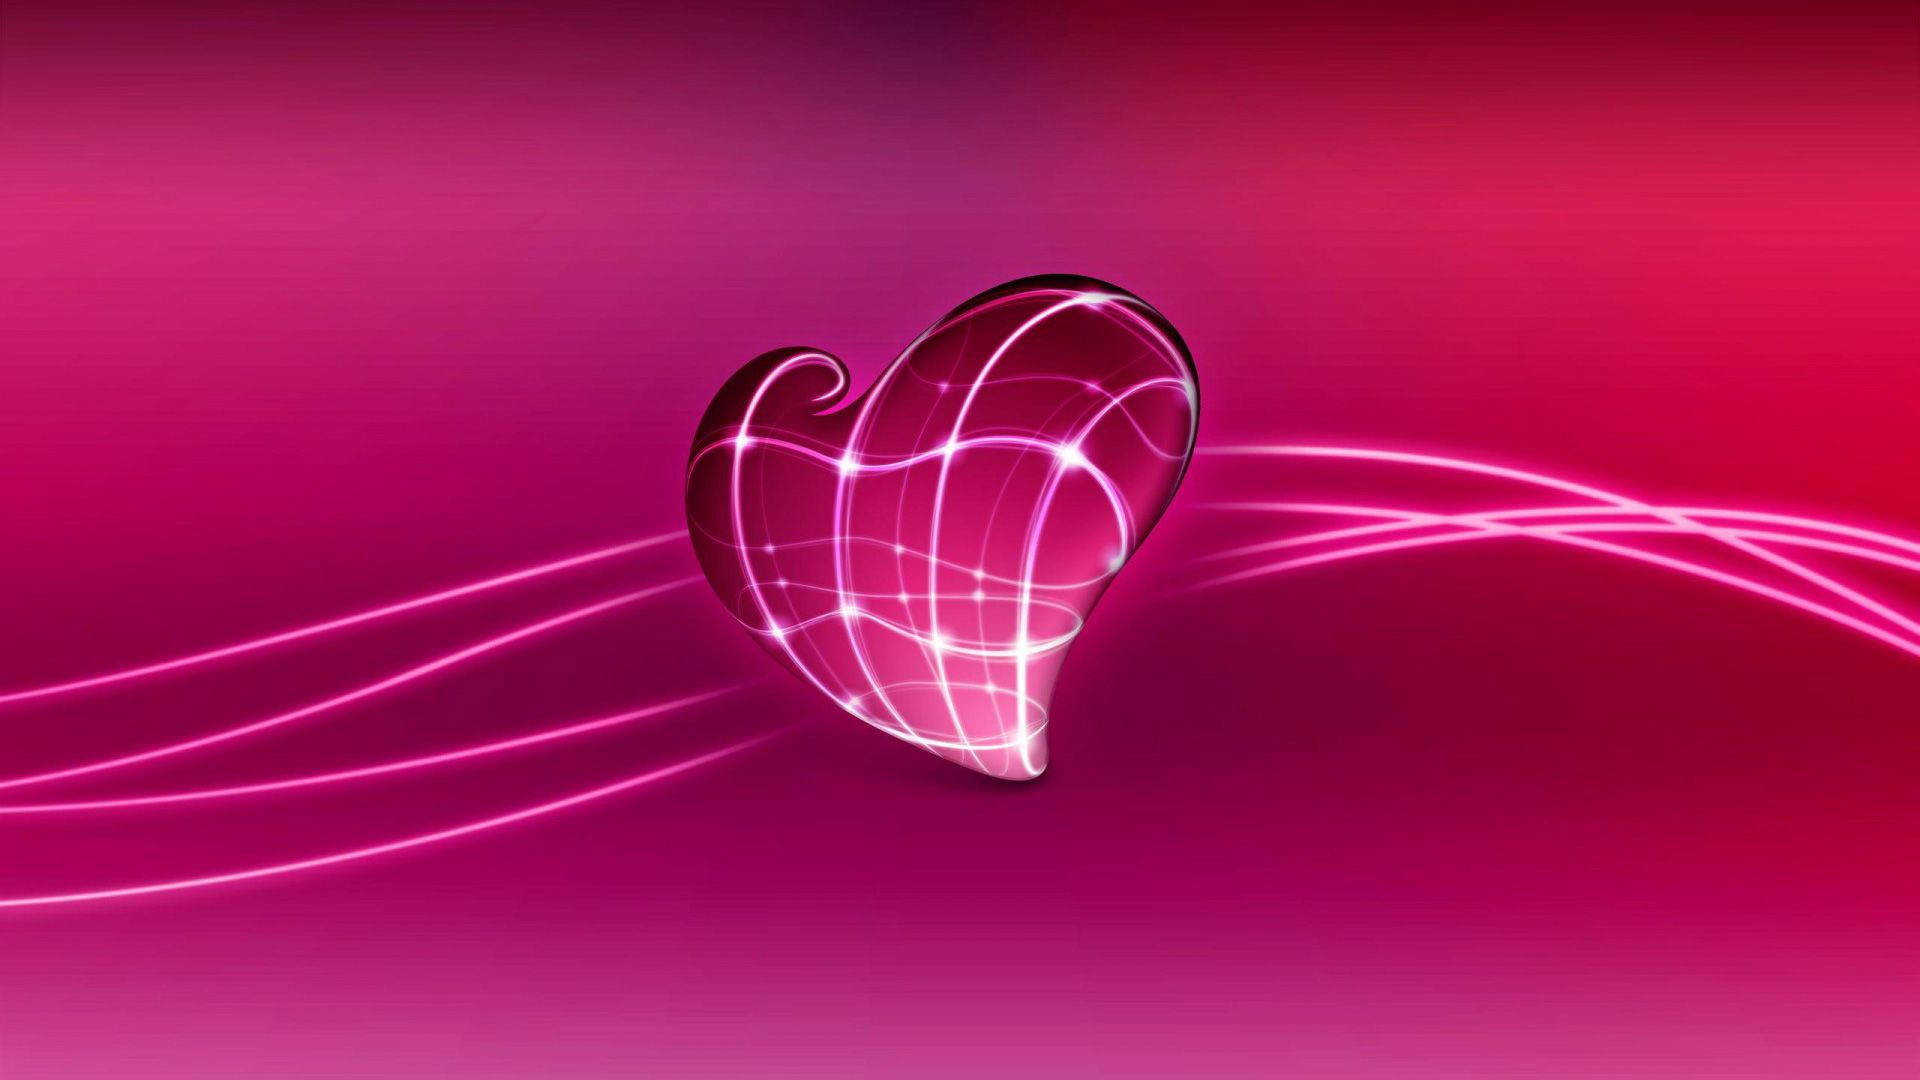 Abstract Pink Love Heart